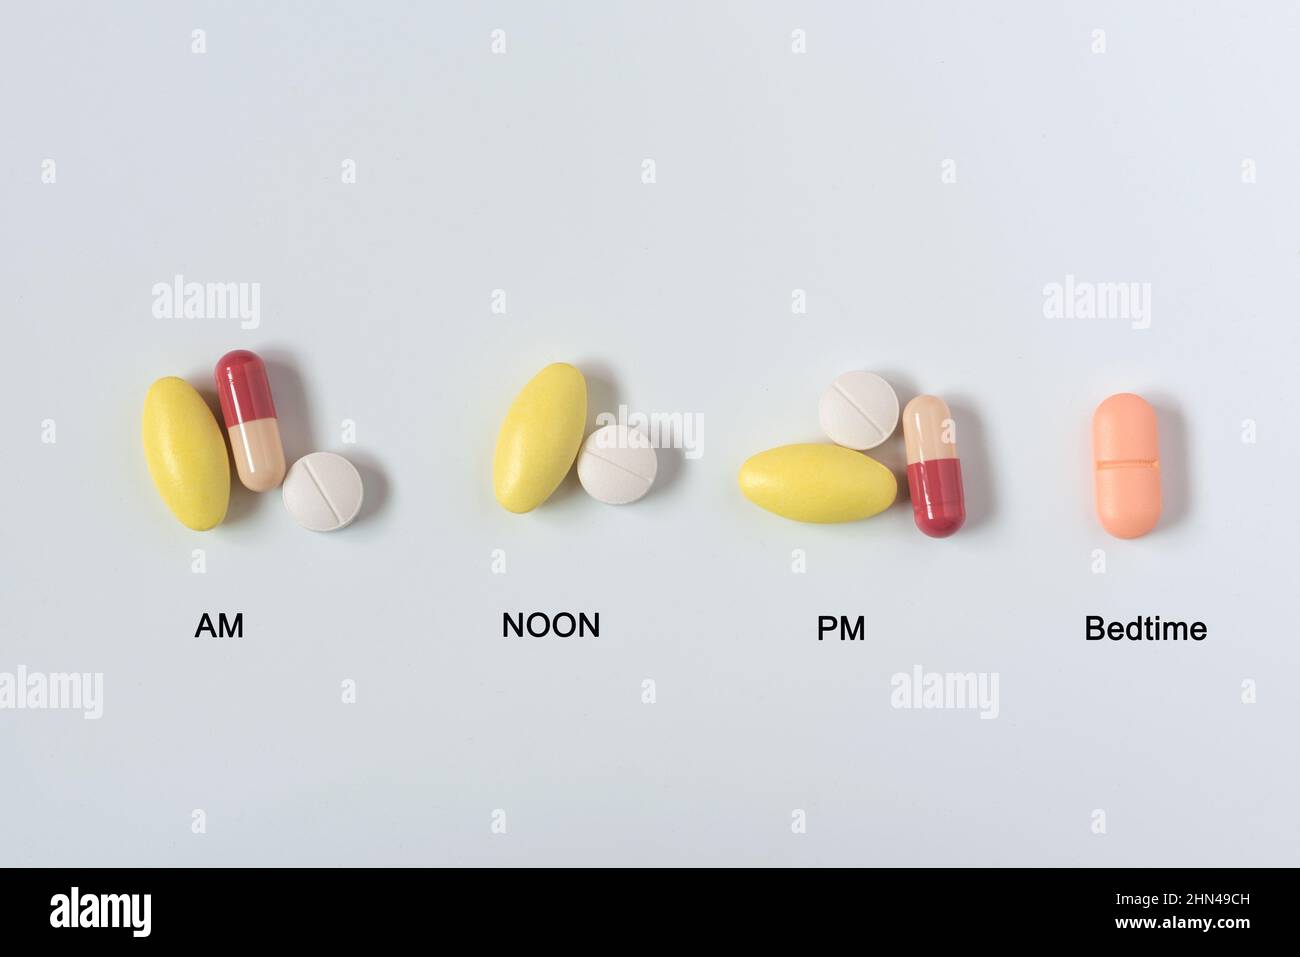 4 Times Day AM PM Morning Noon Eve Bed Pill Box Medication